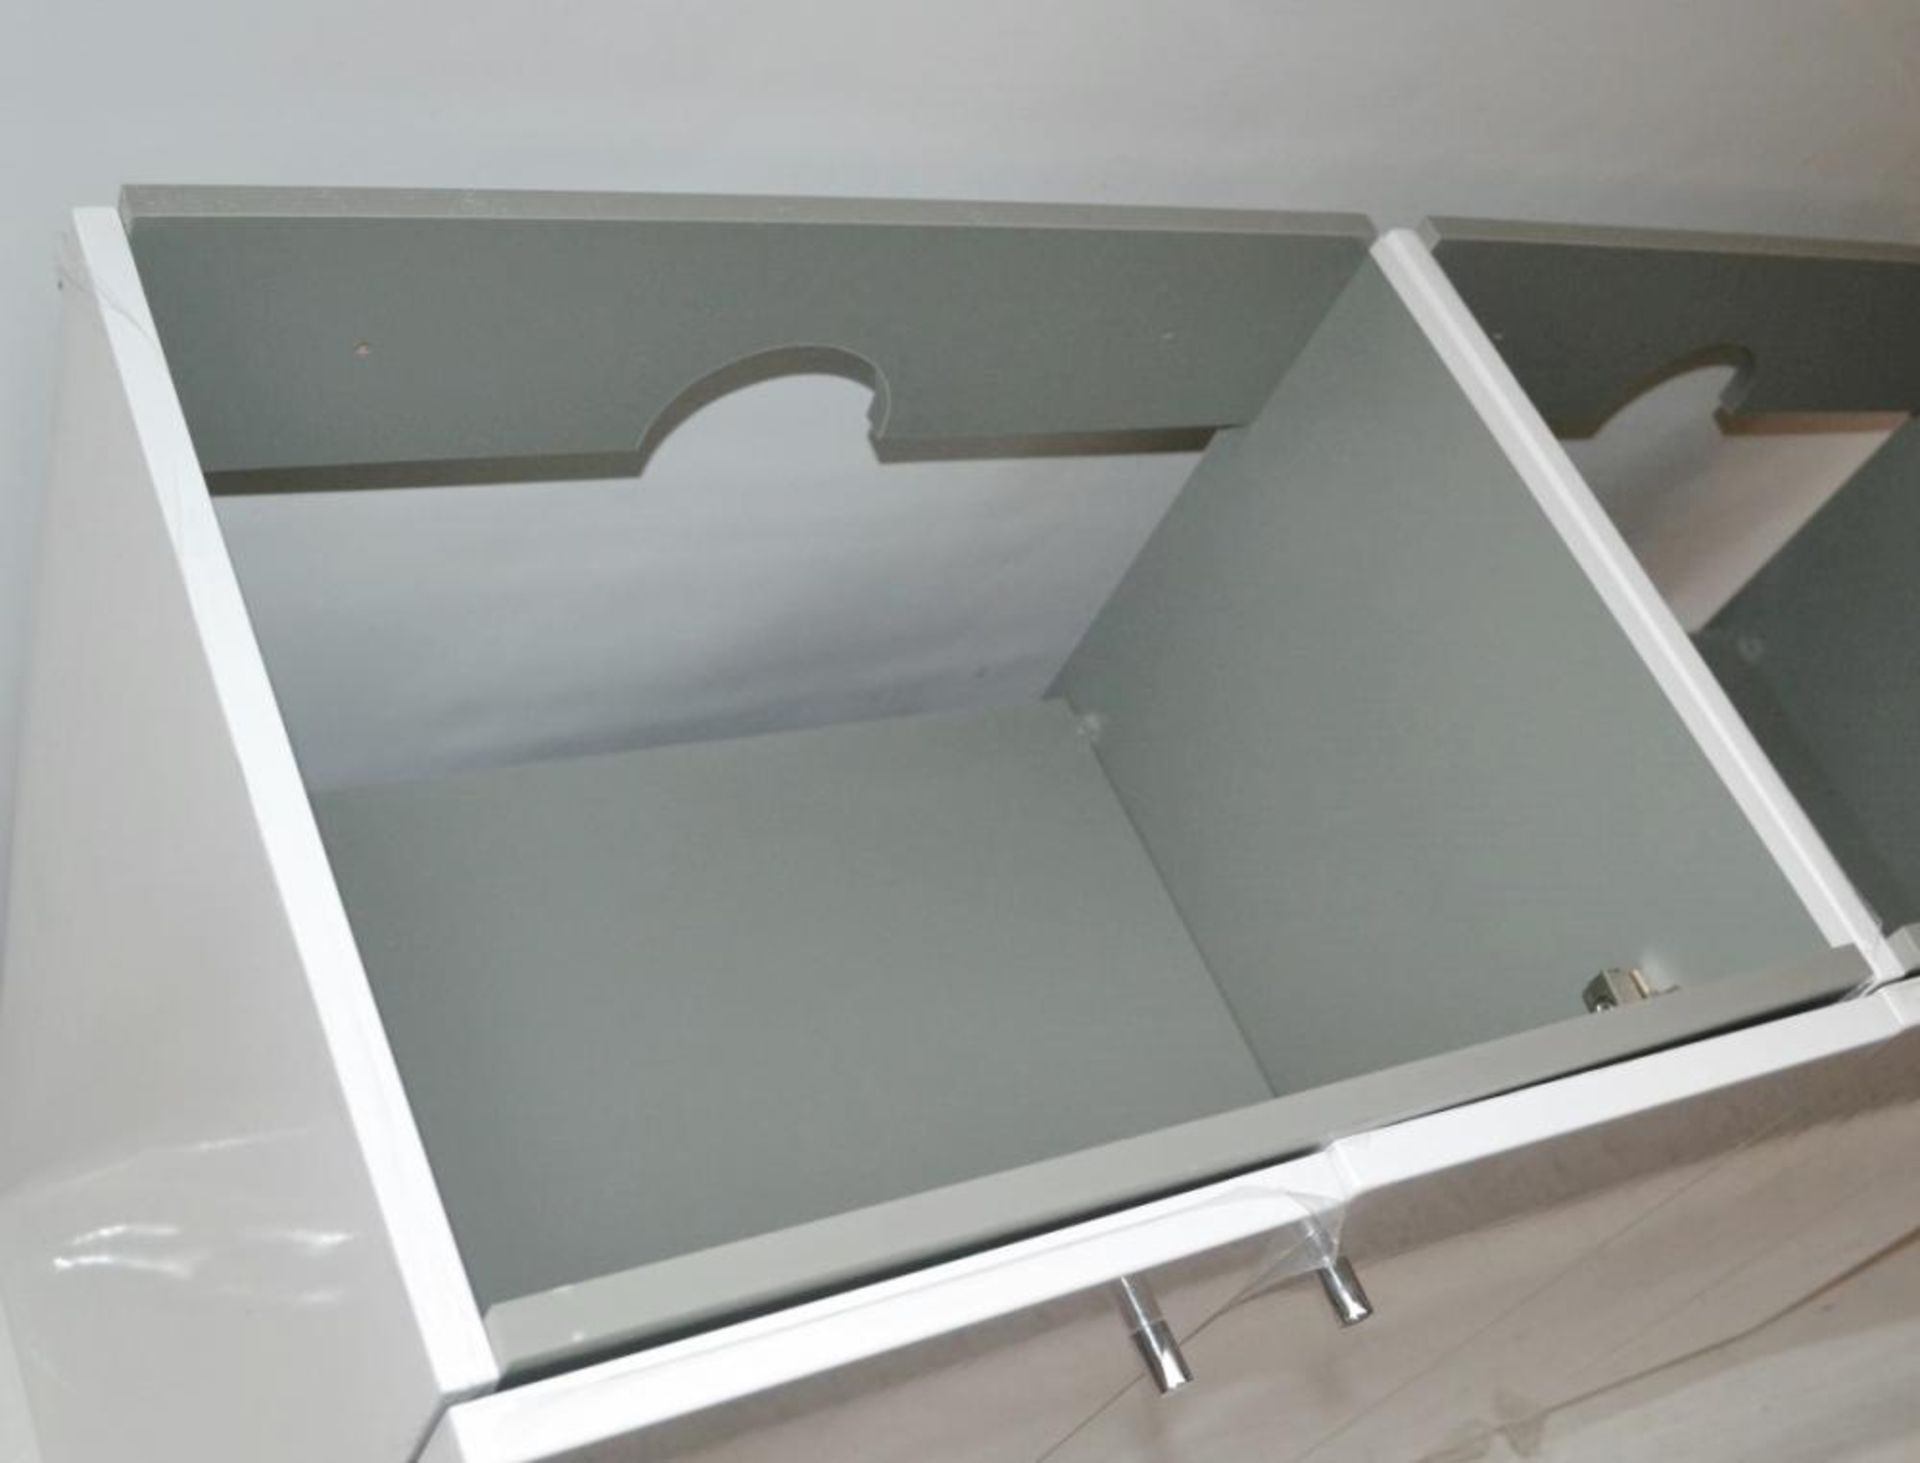 1 x His & Hers Double Bathroom Vanity Unit - 1200mm Wide - Features a High Gloss White Finish and - Image 7 of 7